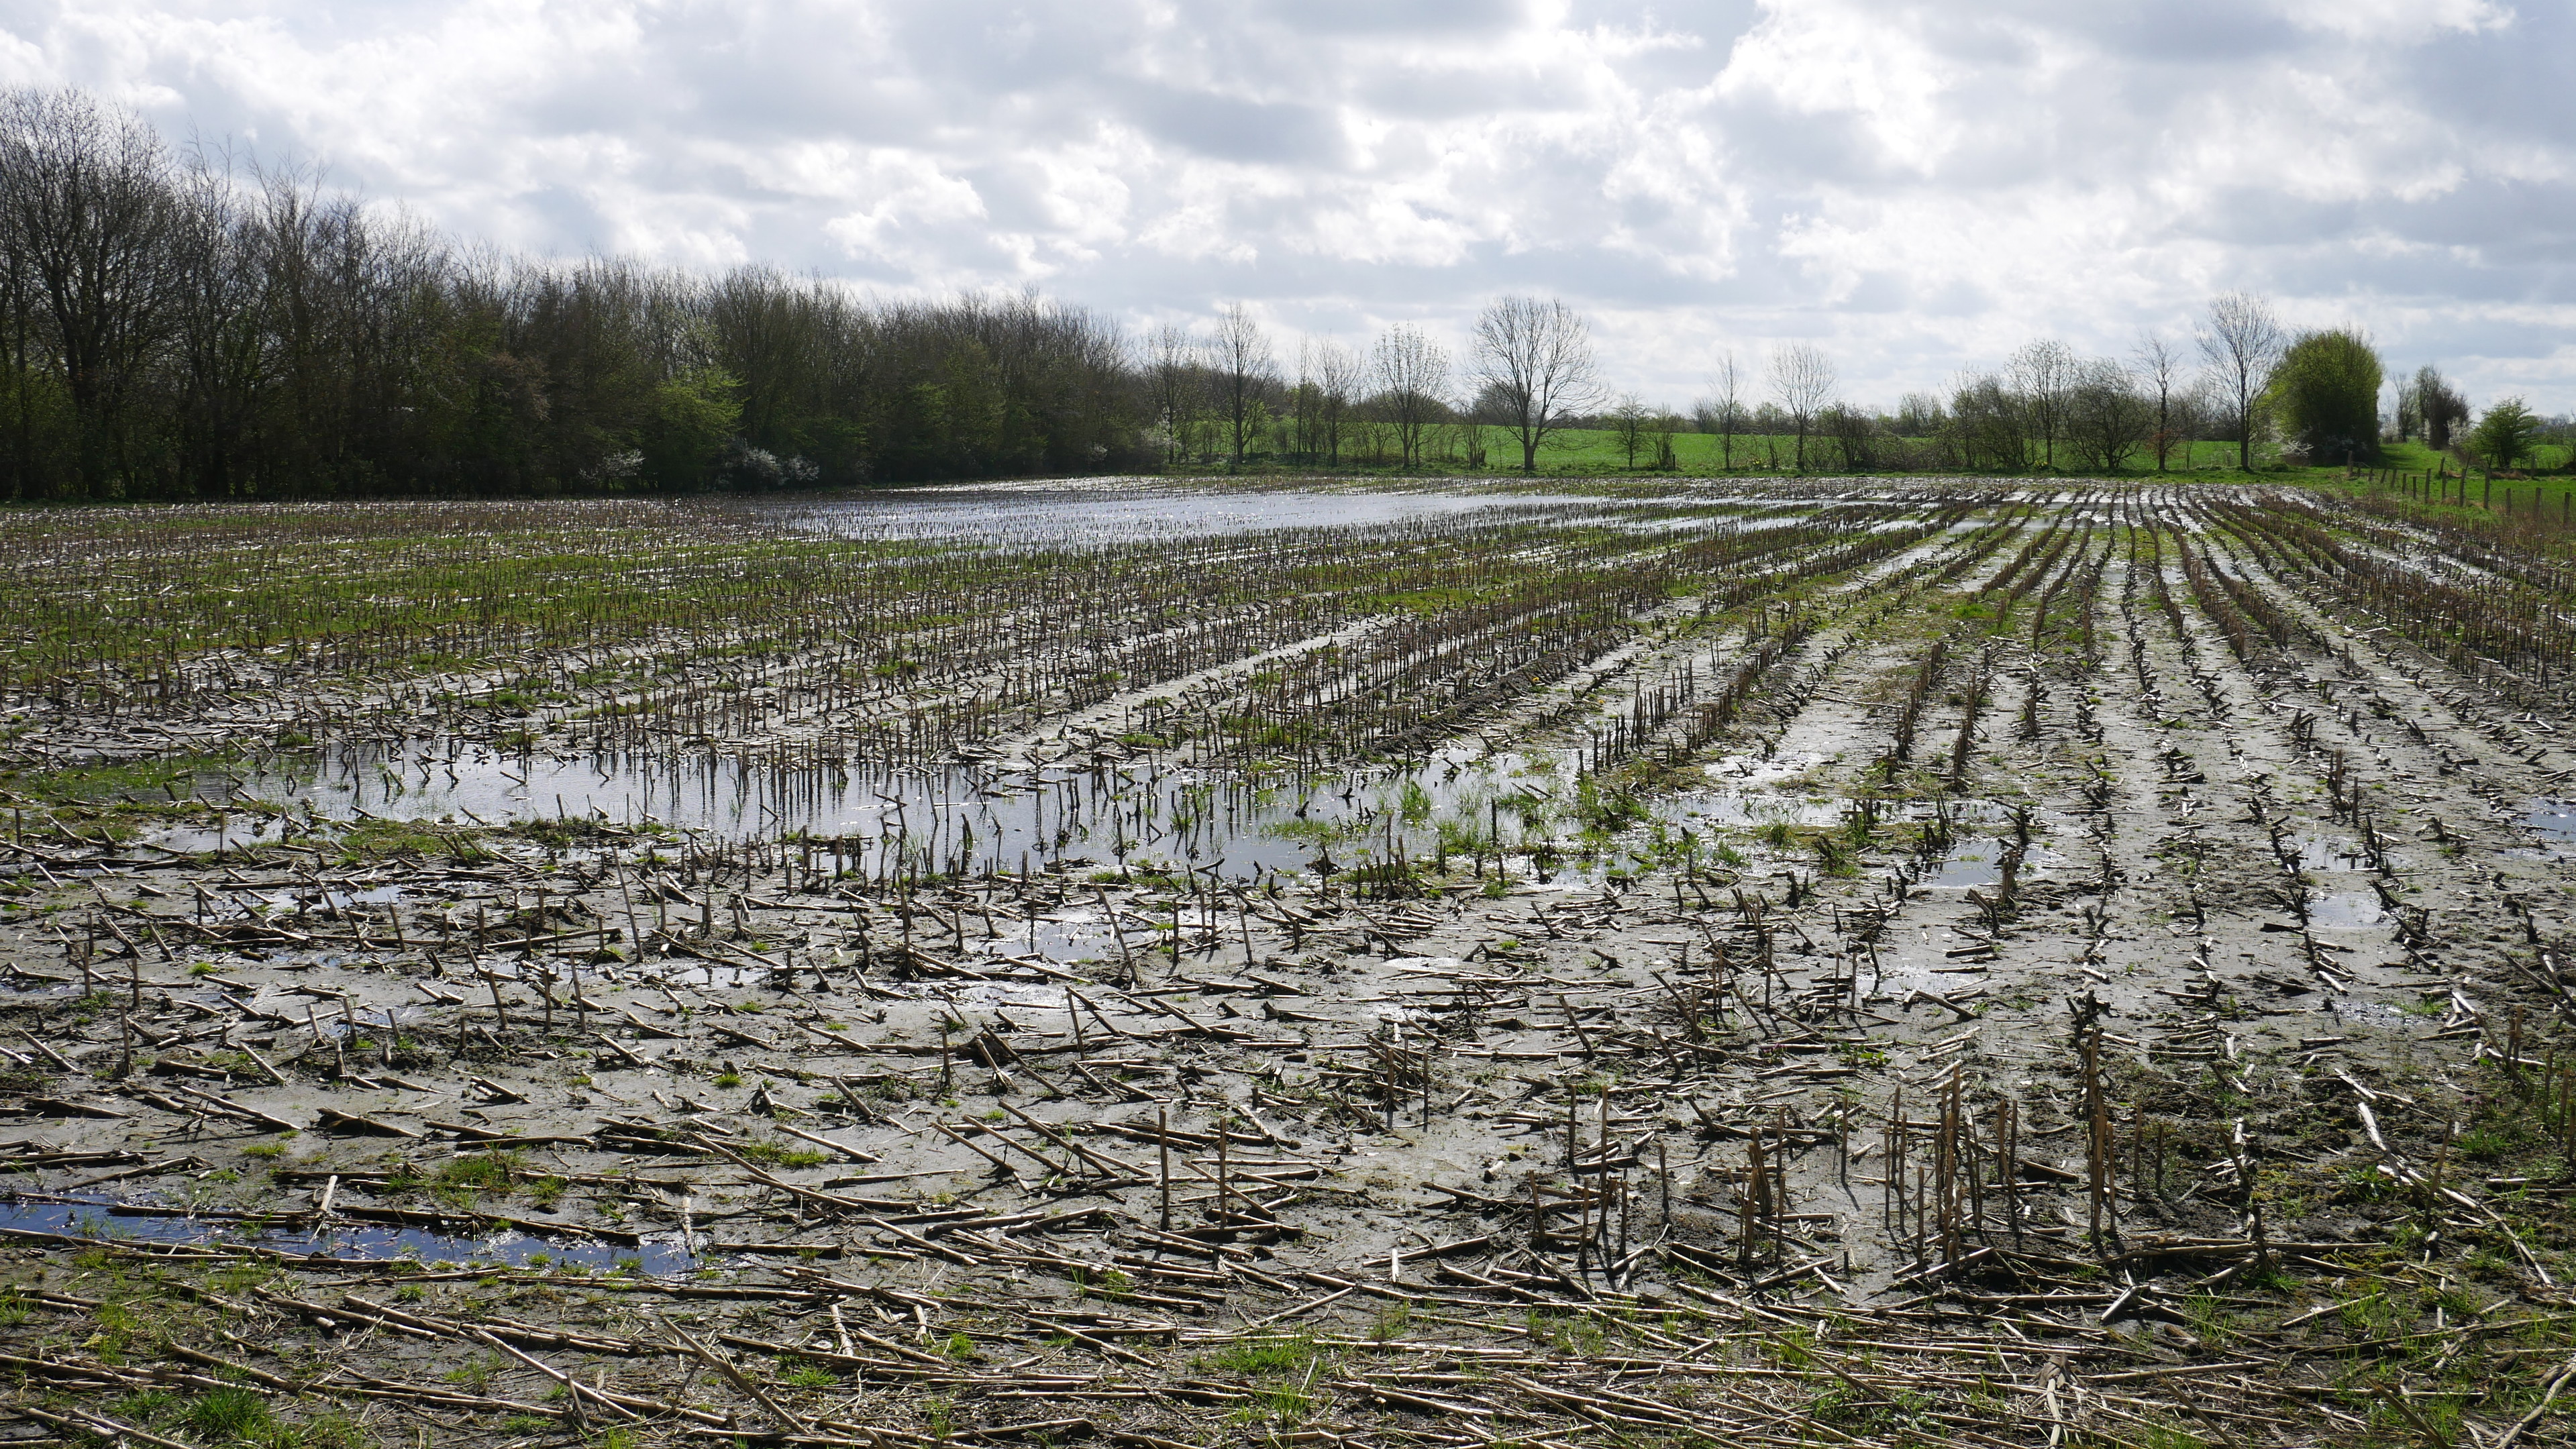 a field with stubs of maize mostly flooded and muddy